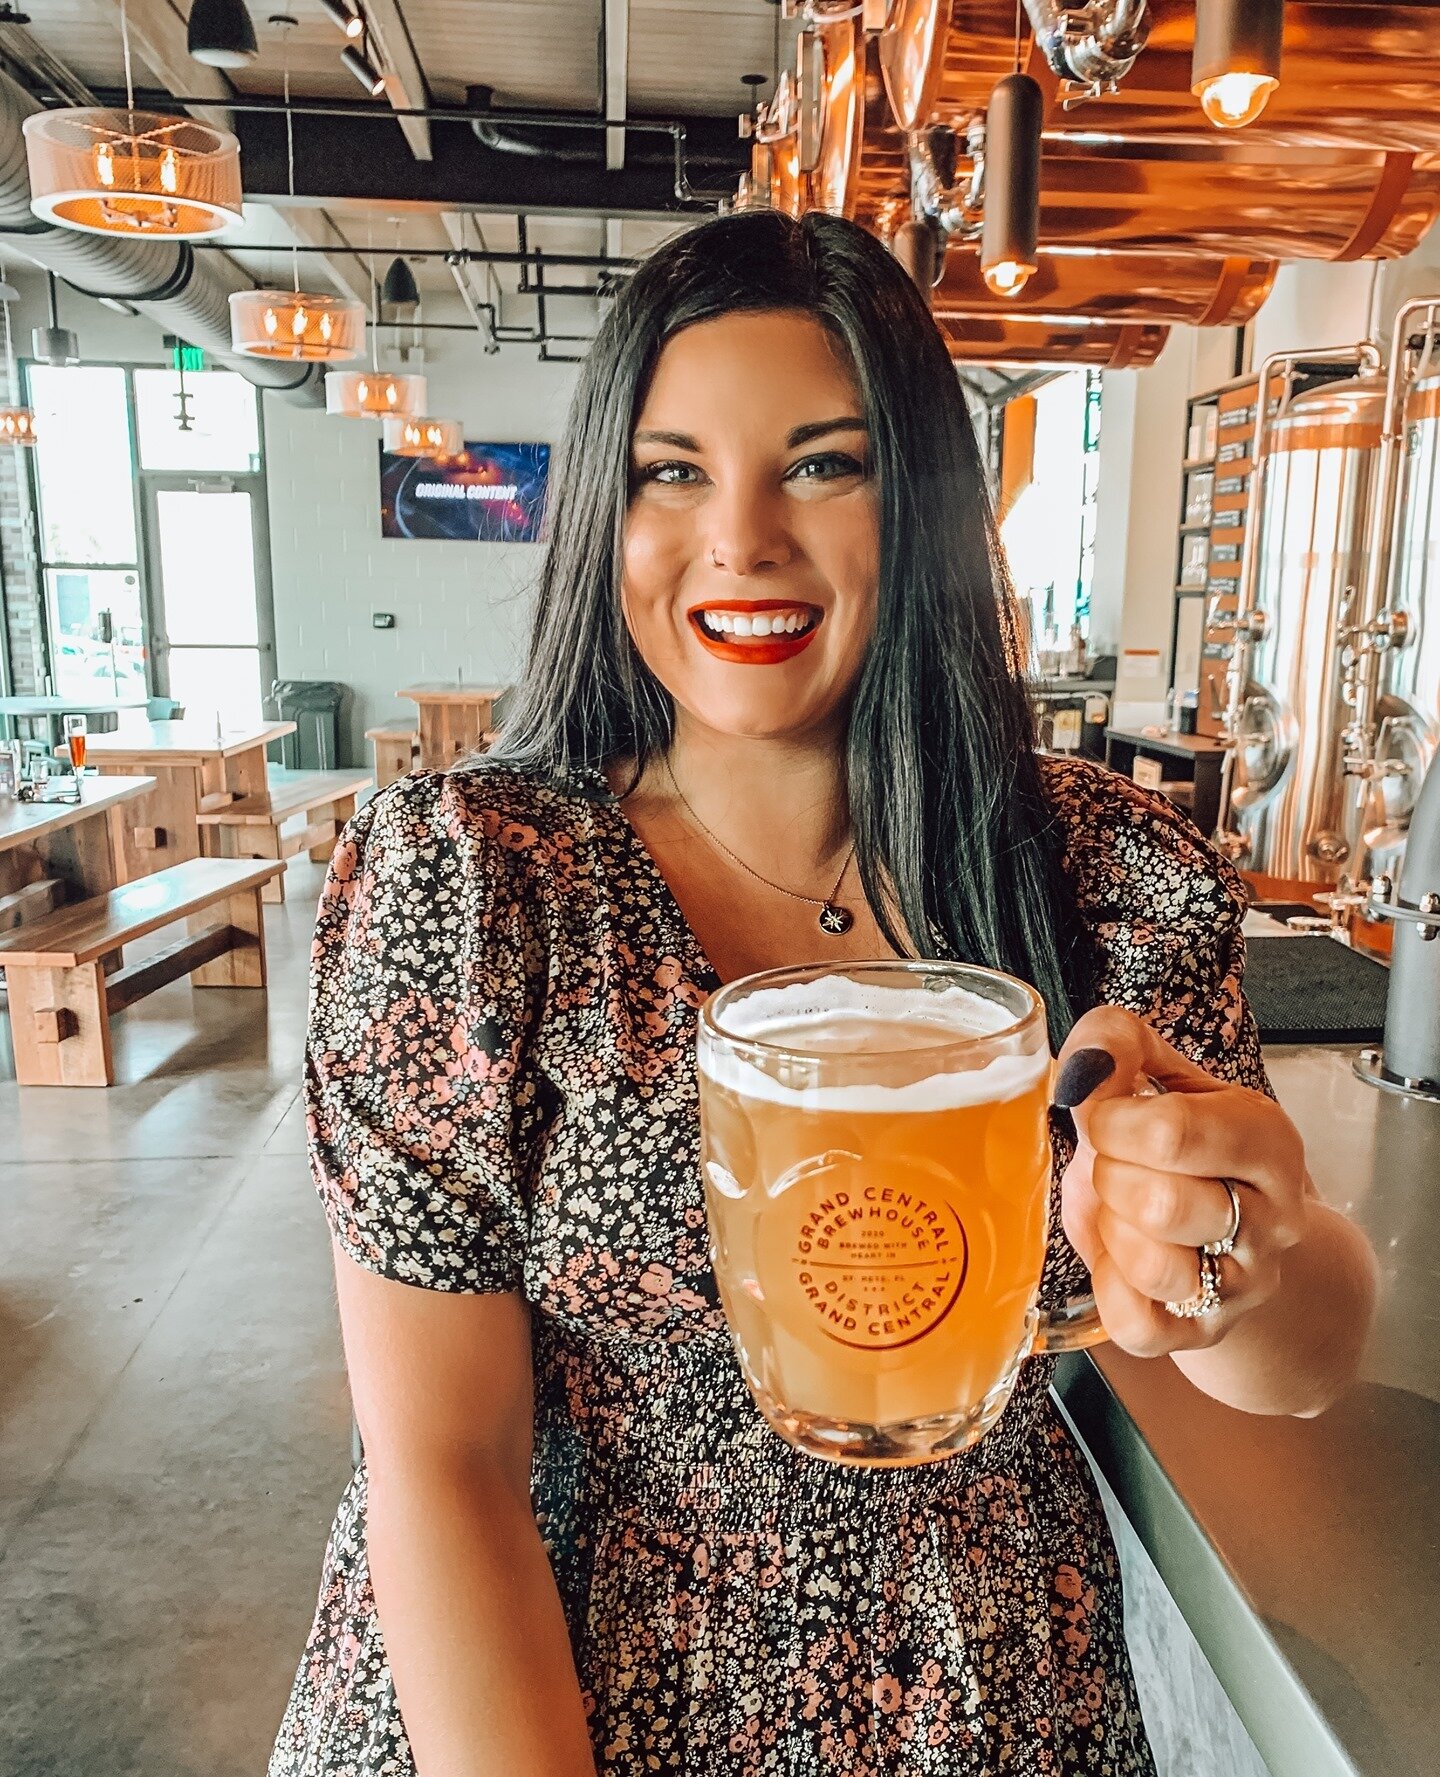 Happy Hump Day! 🍻⁠
⁠
I'm not gonna lie it's been a minute since I went and checked out a new brewery. I for sure am a creature of habit when it comes to where I like to drink hah!⁠
⁠
I was able to pop into @grandcentralbrewhouse the other day for a 